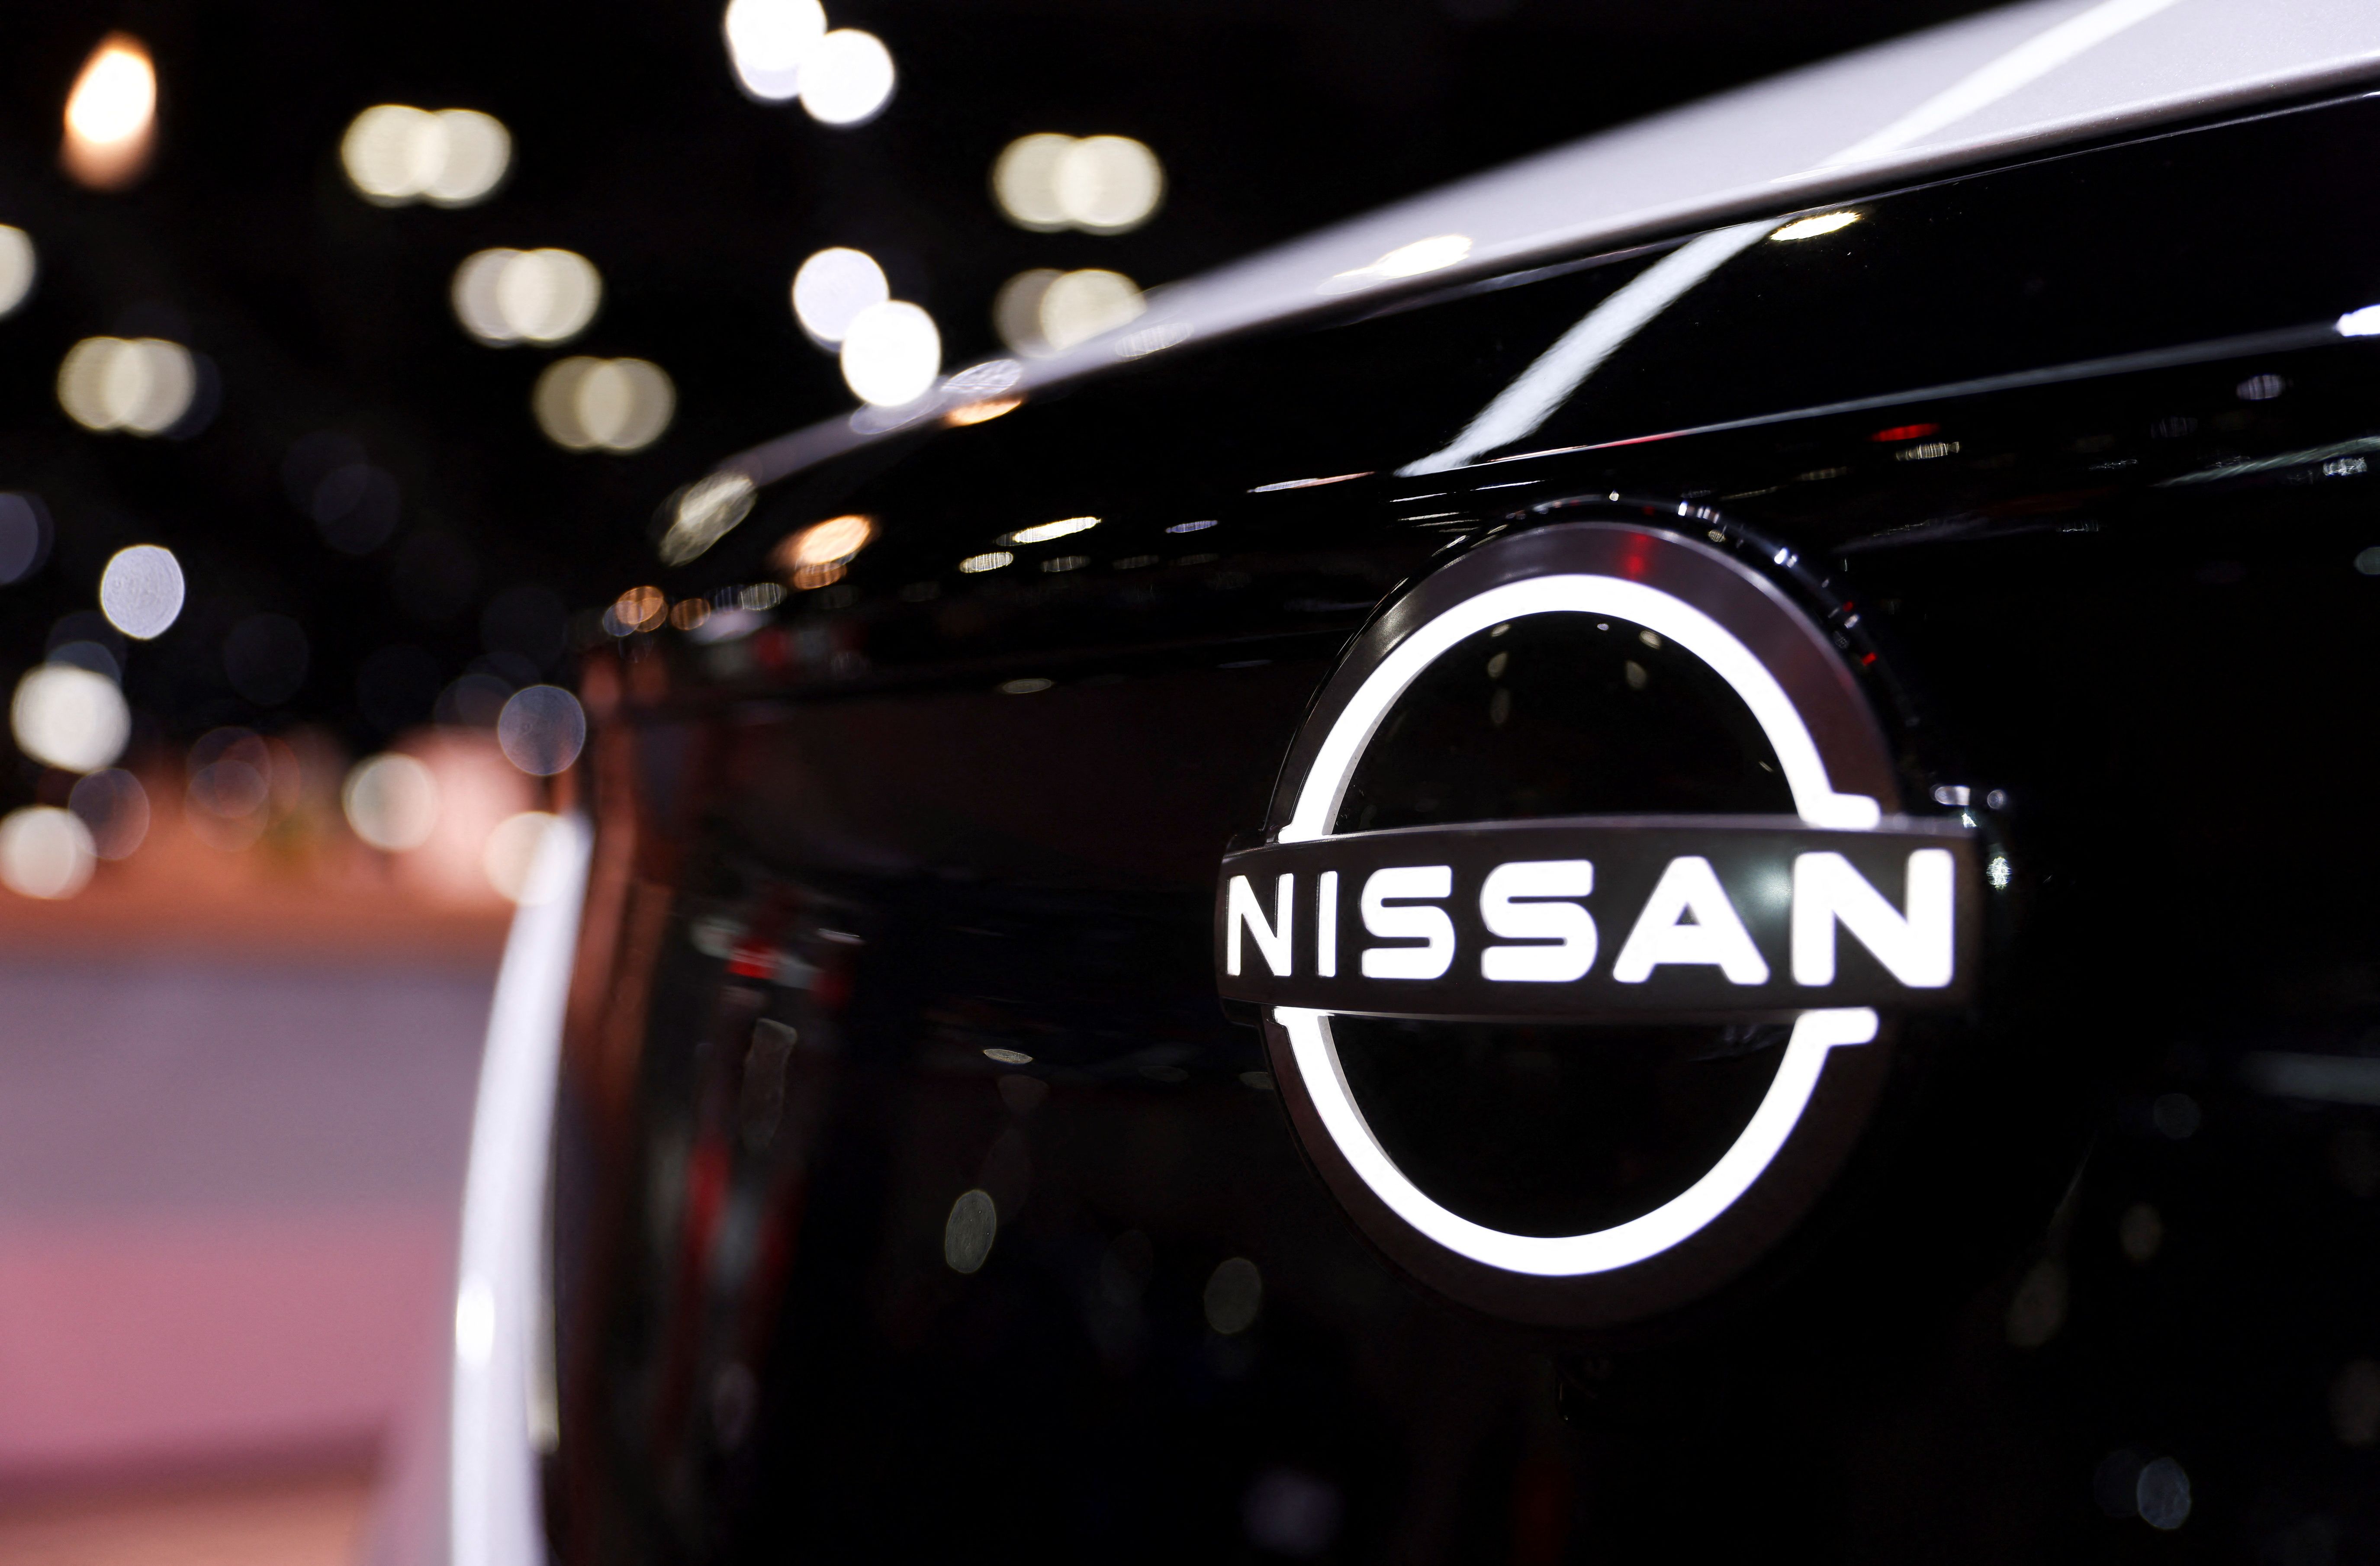  Why Now Is The Perfect Time To Grab These Nissan Deals?
